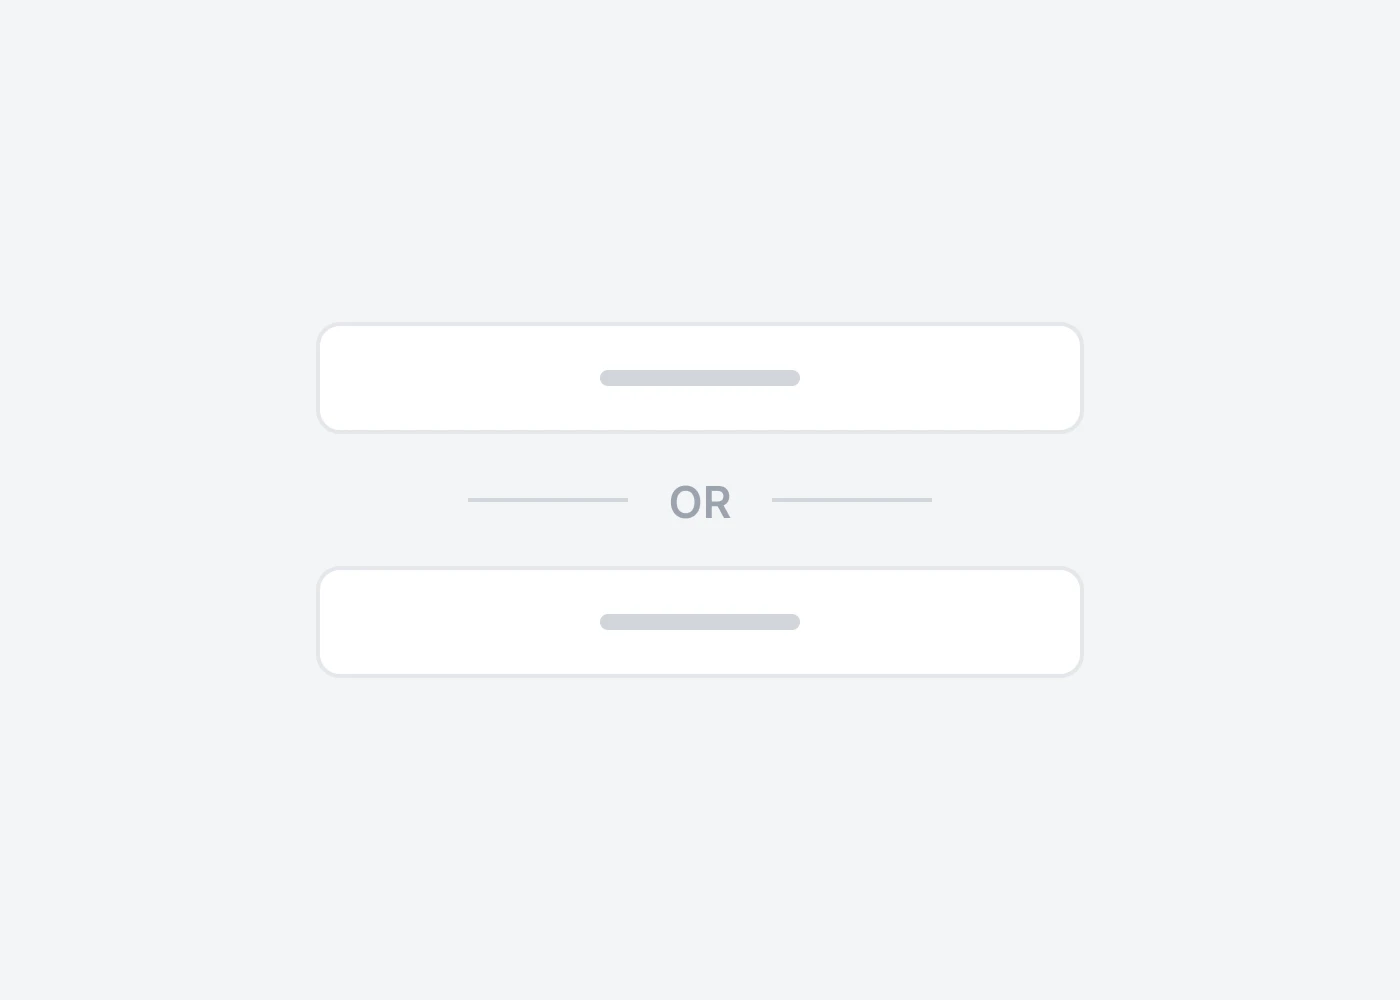 Tailwind CSS Dividers and <hr>